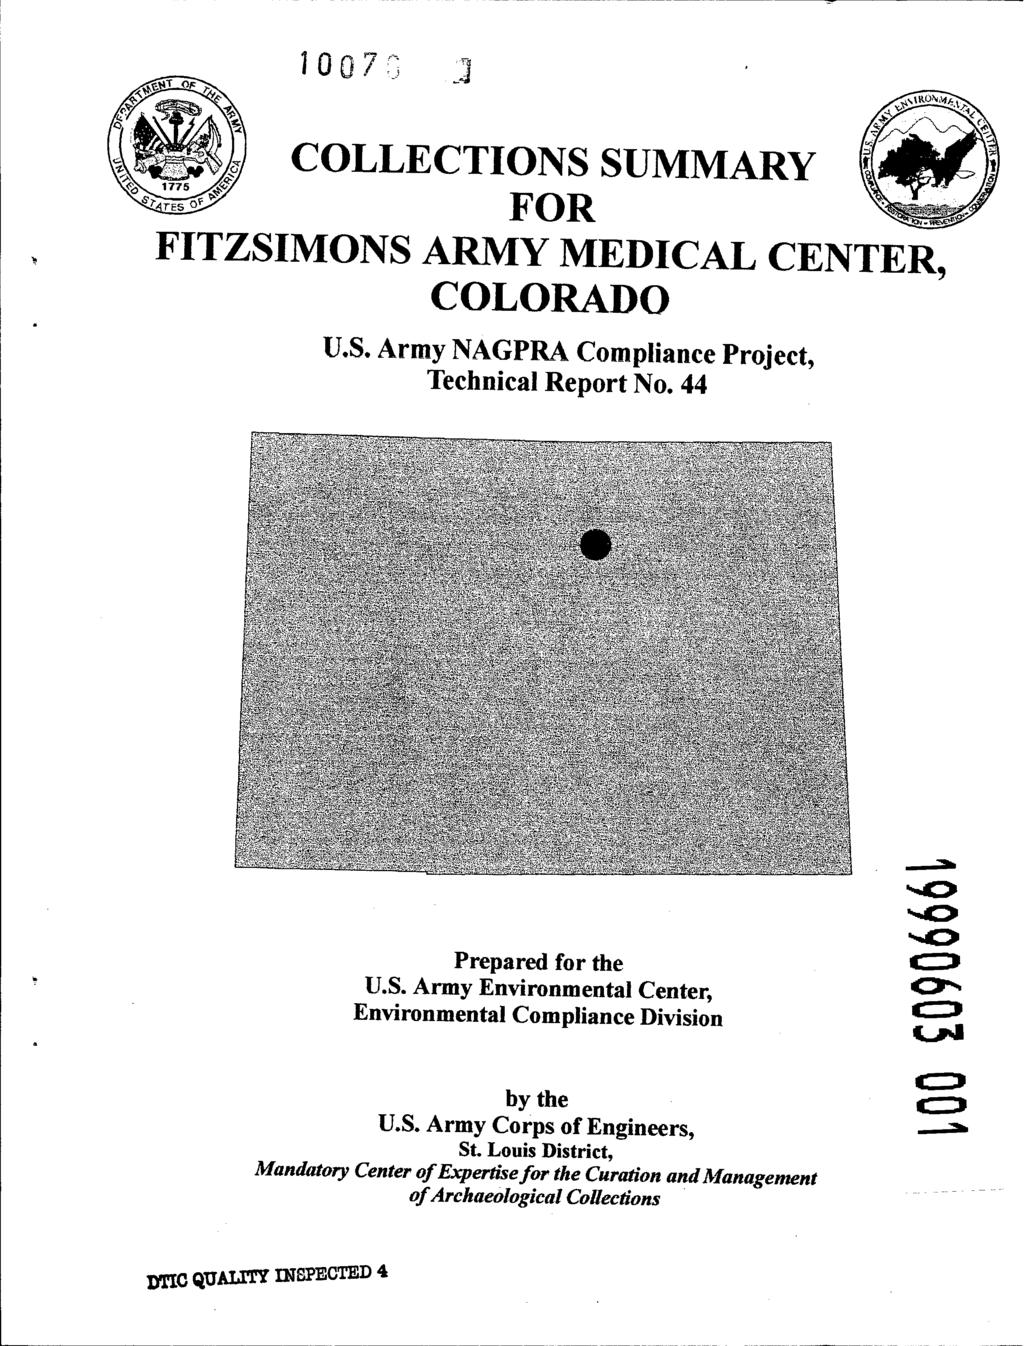 100 J COLLECTIONS SUMMARY FOR FITZSIMONS ARMY MEDICAL CENTER, COLORADO U.S. Army NAGPRA Compliance Project, Technical Report No. 44 Prepared for the U.S. Army Environmental Center, Environmental Compliance Division by the U.